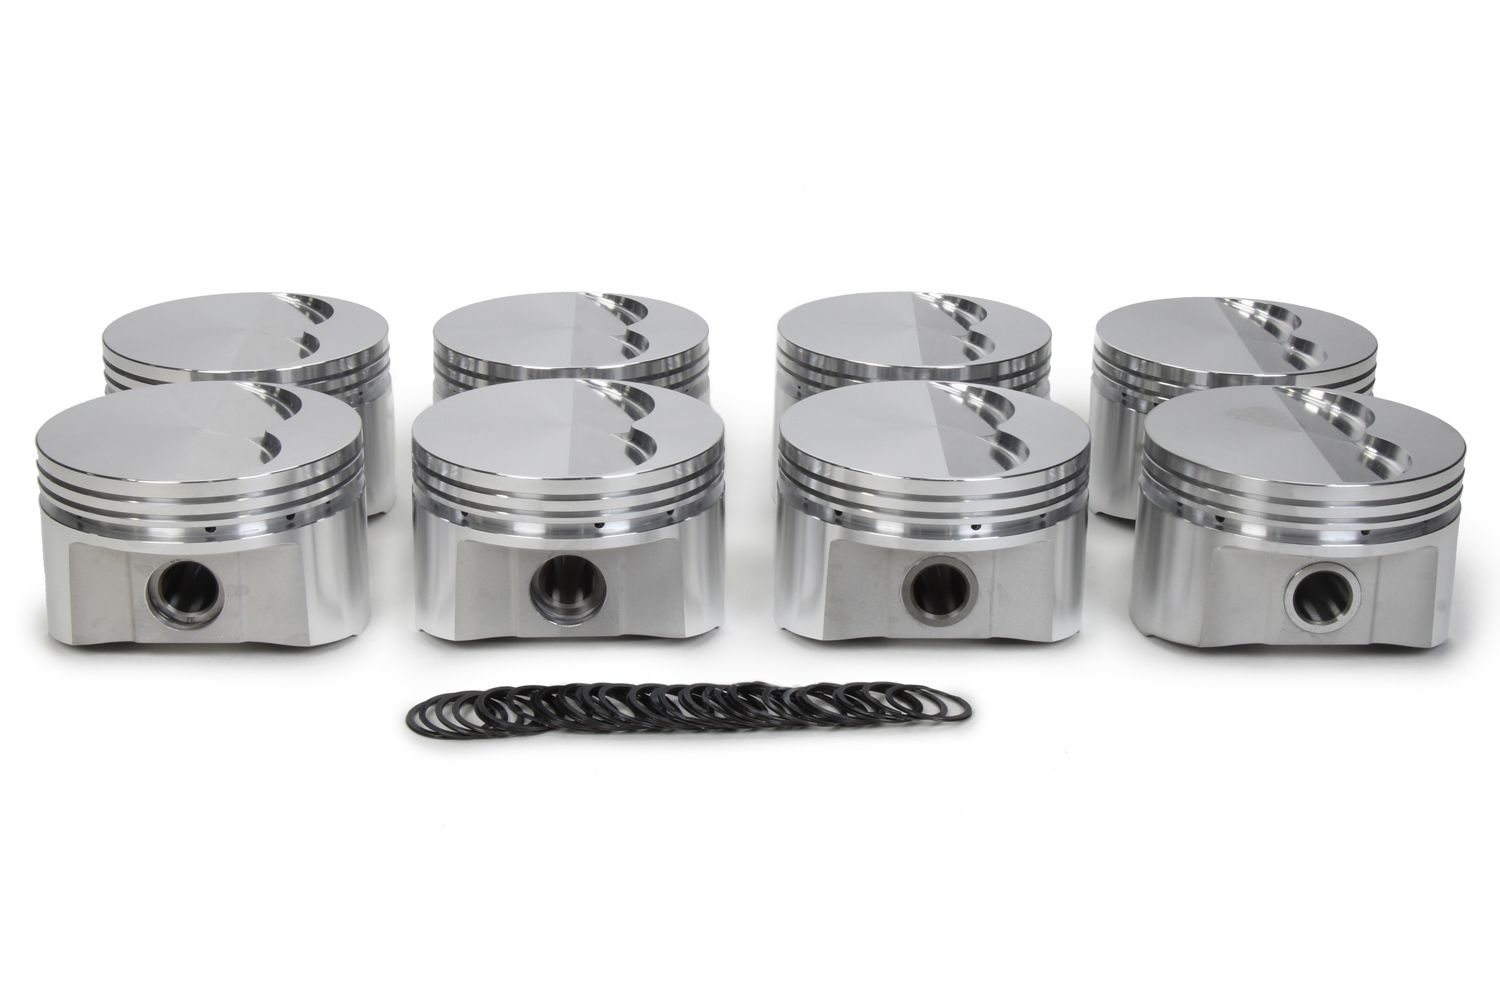 SRP Pistons 153983 Piston, Flat Top, Forged, 4.160 in Bore, 1/16 x 1/16 x 3/16 mm Ring Grooves, Minus 5.00 cc, Pontiac V8, Set of 8